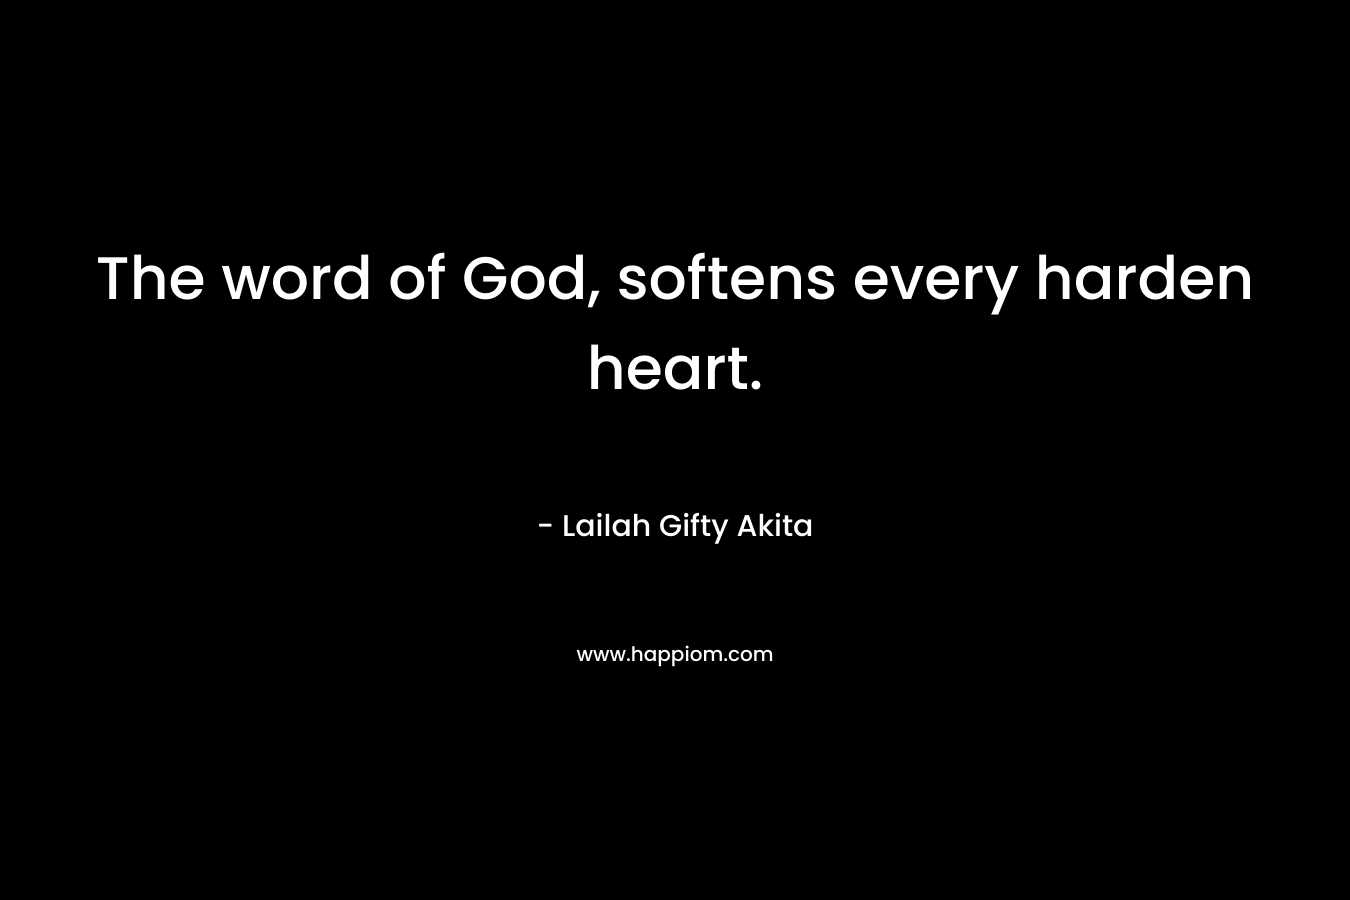 The word of God, softens every harden heart. – Lailah Gifty Akita